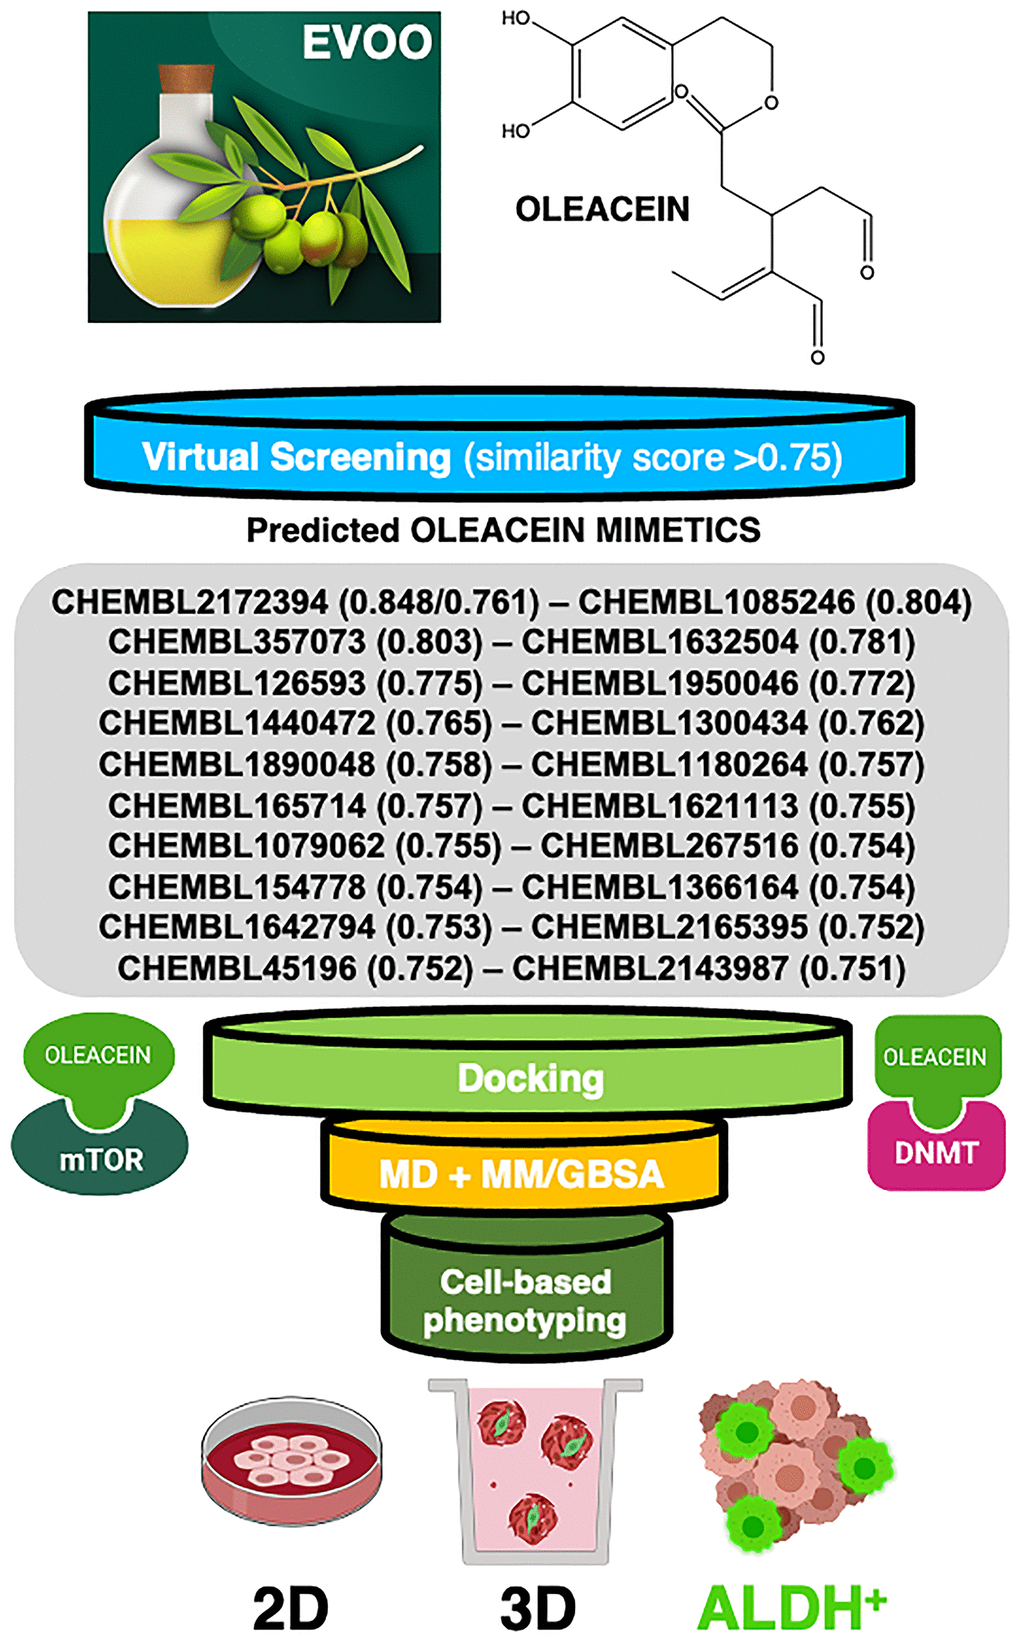 Computer-assisted discovery of oleacein biomimetics with anti-CSC activity. Schematic illustration of the computational framework coupled to laboratory-based phenotypic testing. The values in parentheses are similarity scores calculated with respect to parental oleacein.